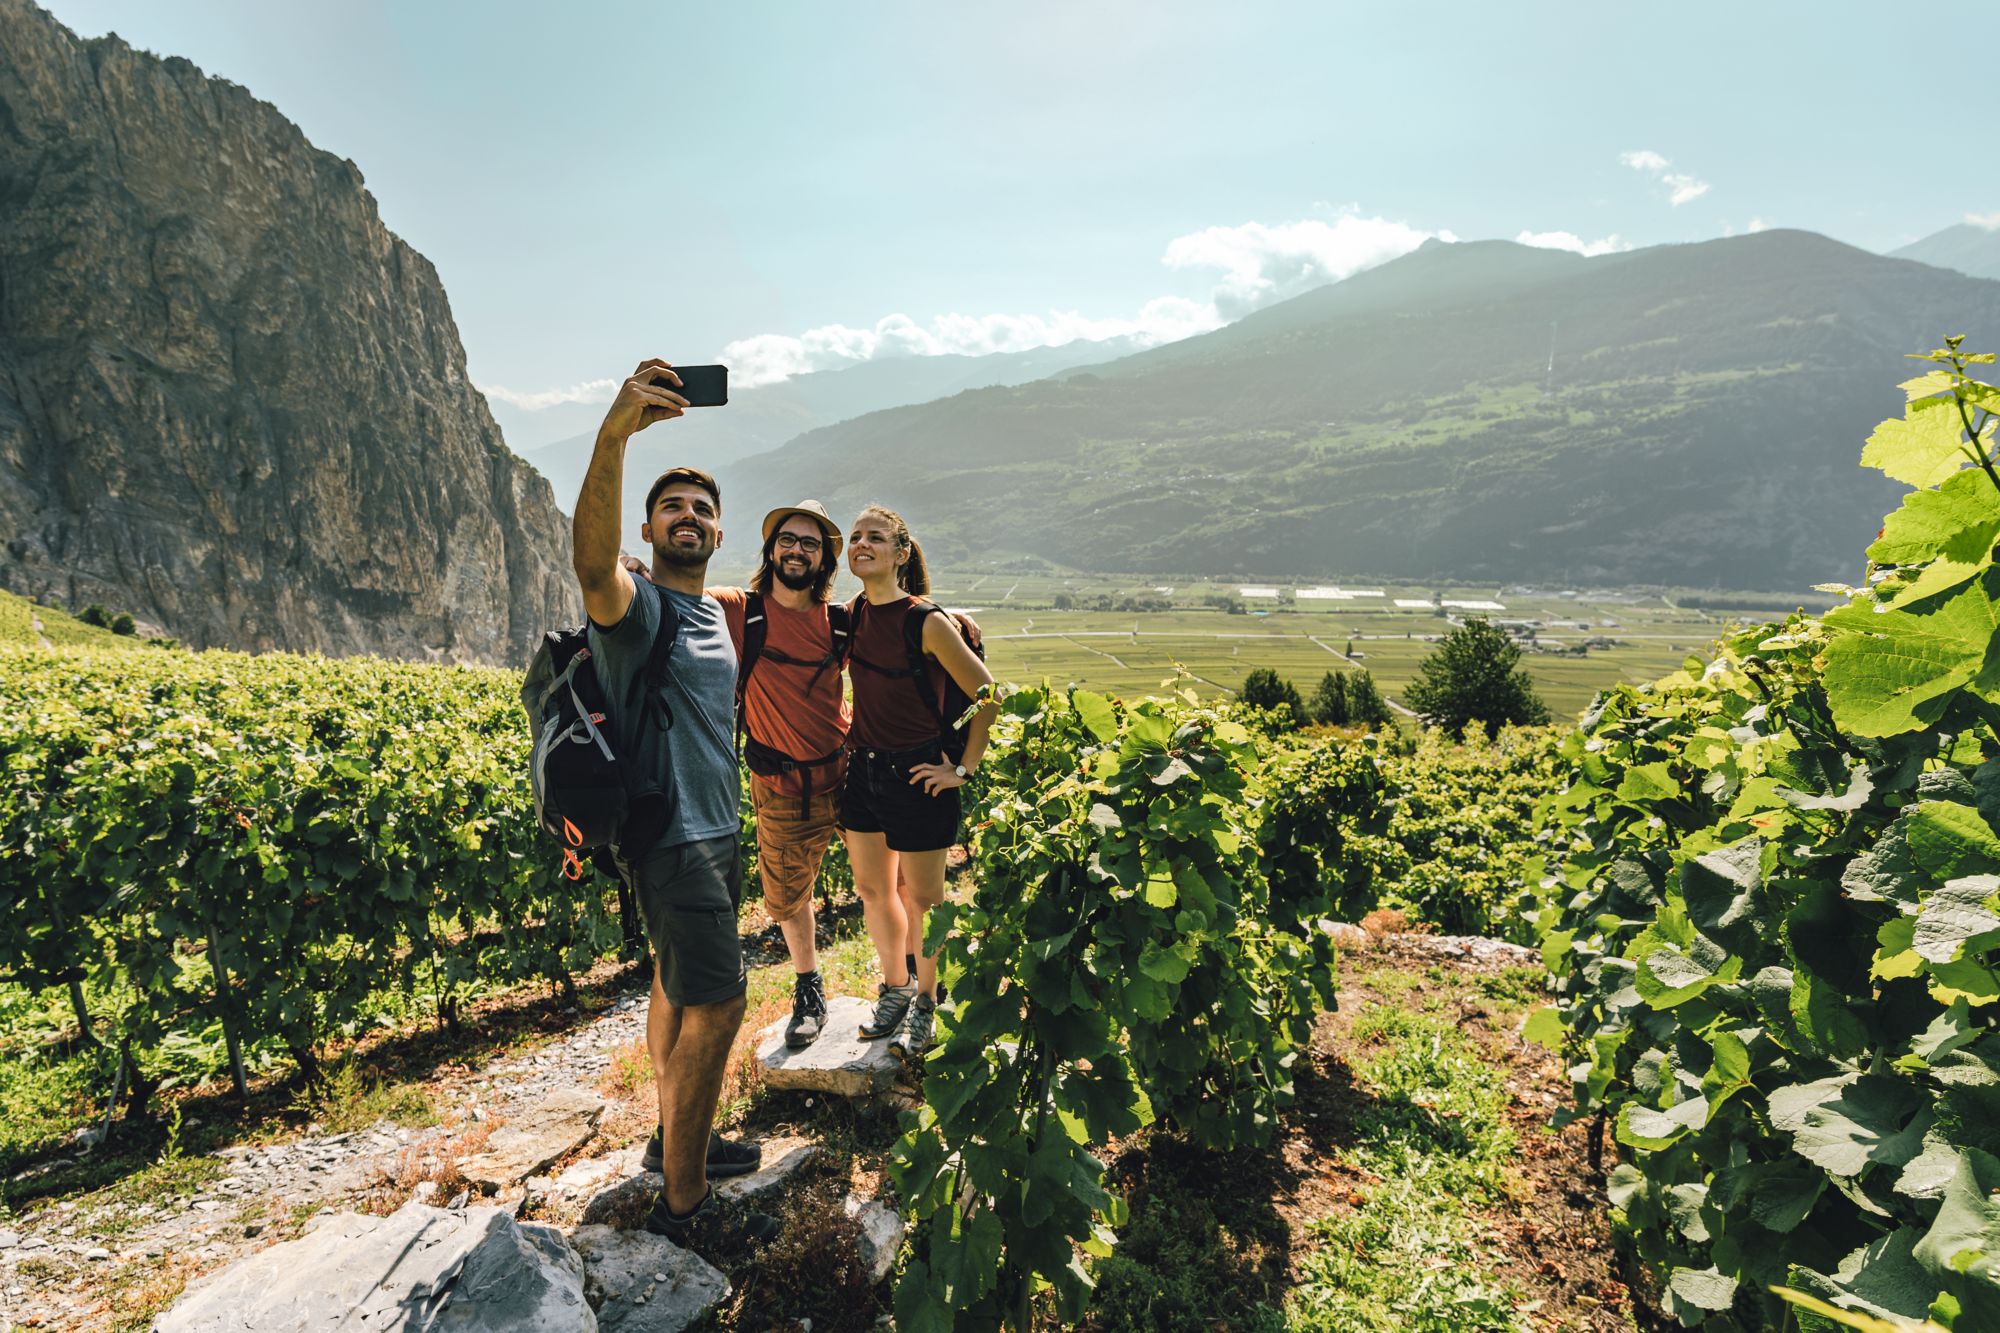 3 adults take a picture selfie in the vineyard of Chamoson, Valais, Switzerland